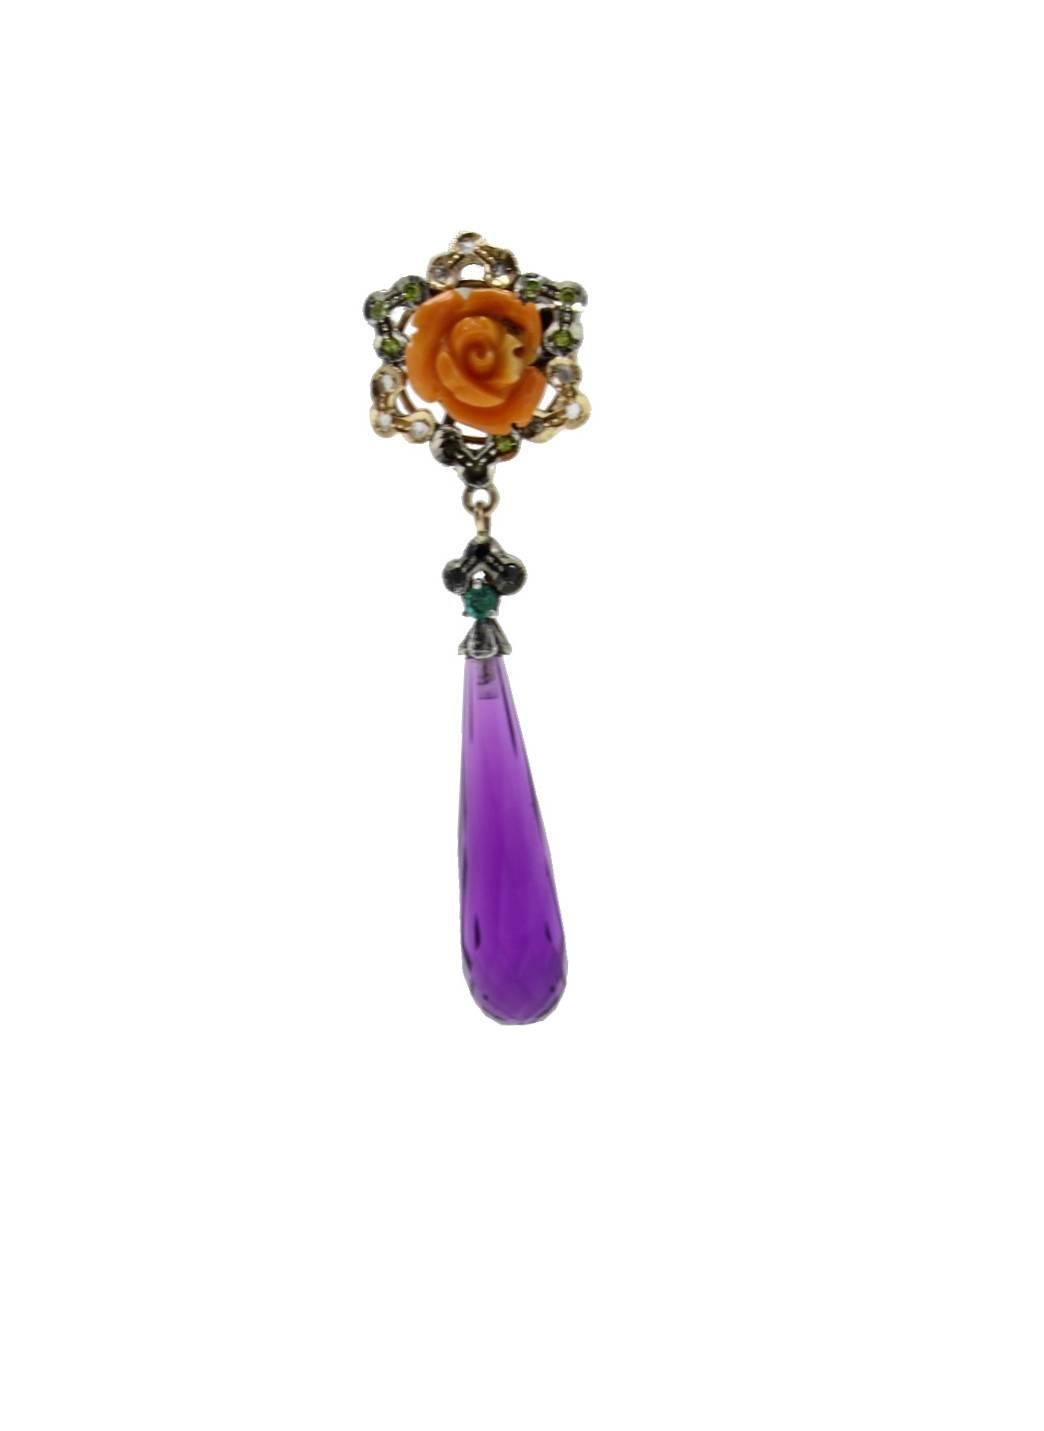 Dangle earrings in 9kt yellow gold and silver both composed of a rose carved coral surrounded by diamonds and yellow sapphires linked to a drop od amethyst by an emerald and three blue sapphires.

gold 3.05gr
silver 2.61gr
diamonds 0.22kt
gems